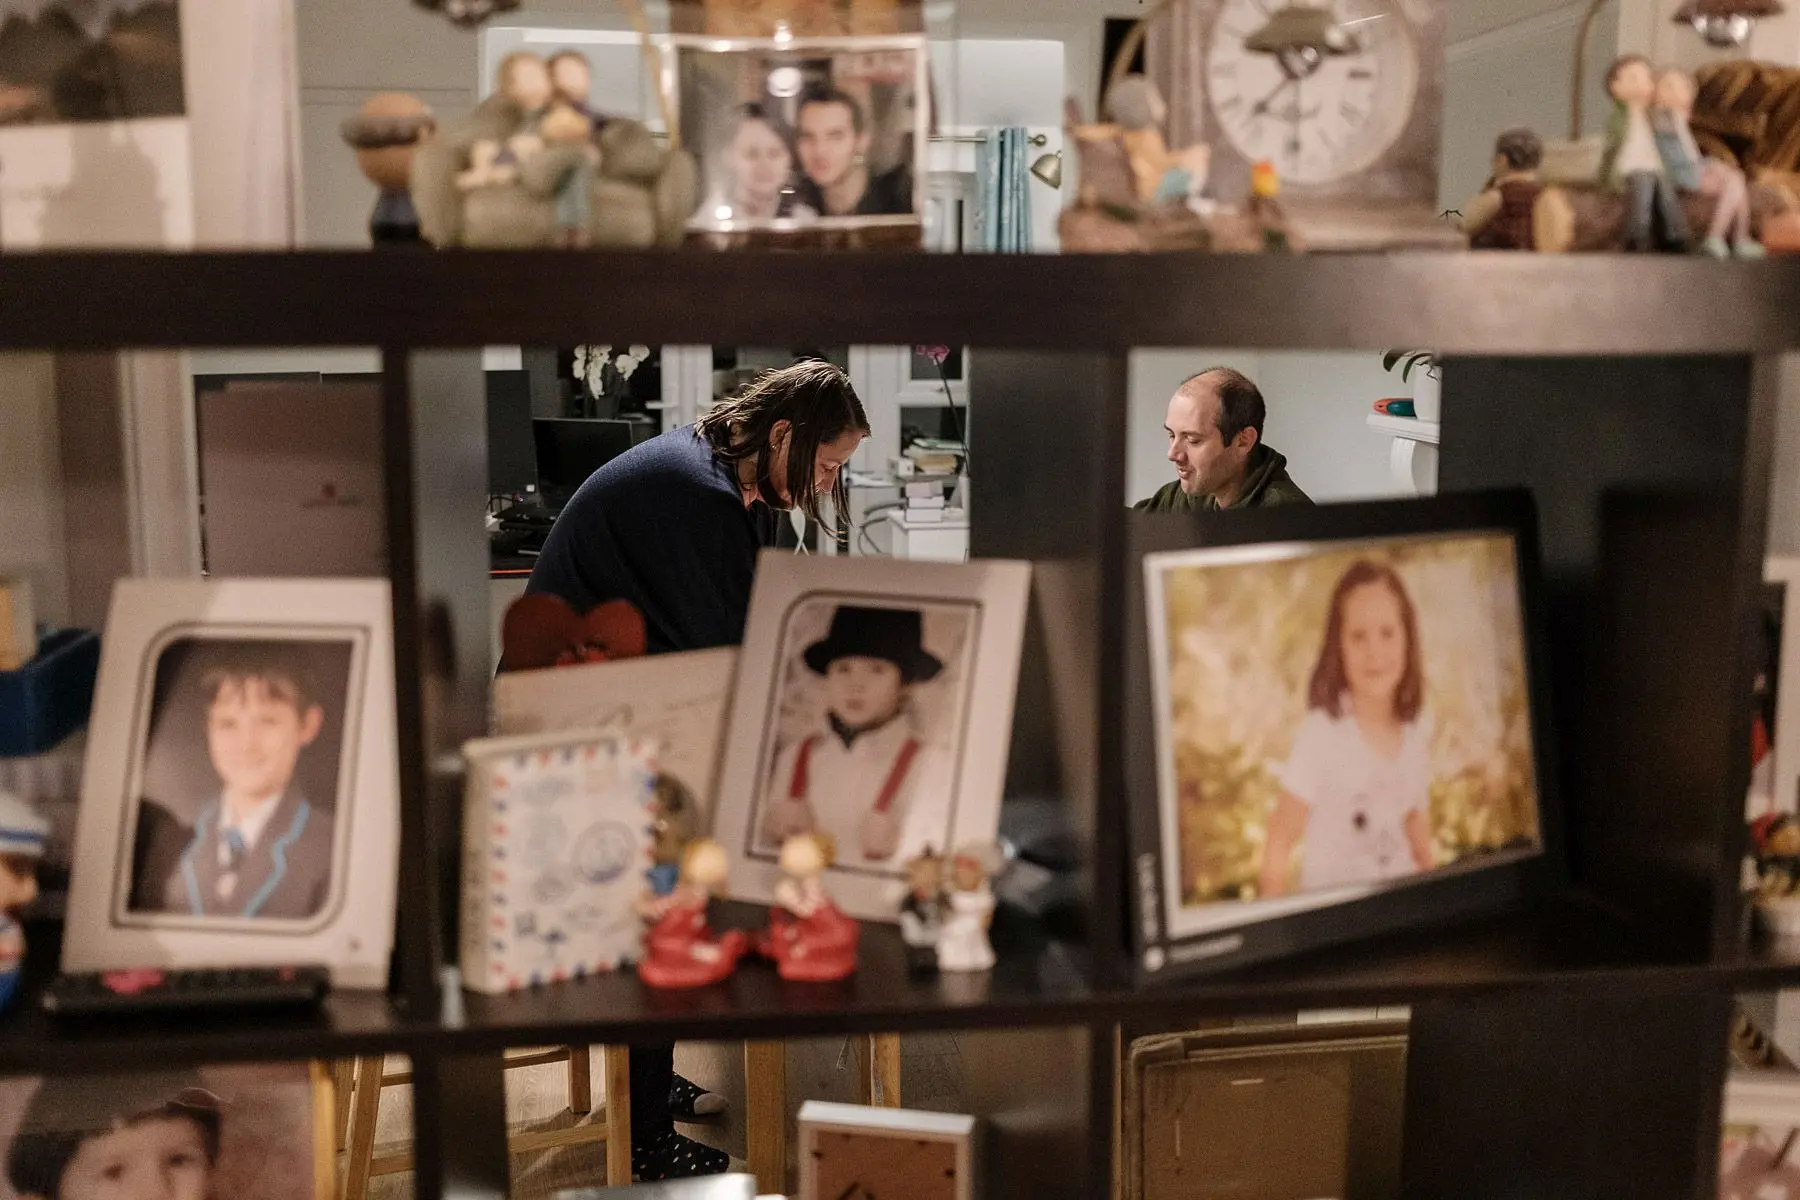 Surrounded by family pictures, a couple sits in their living room